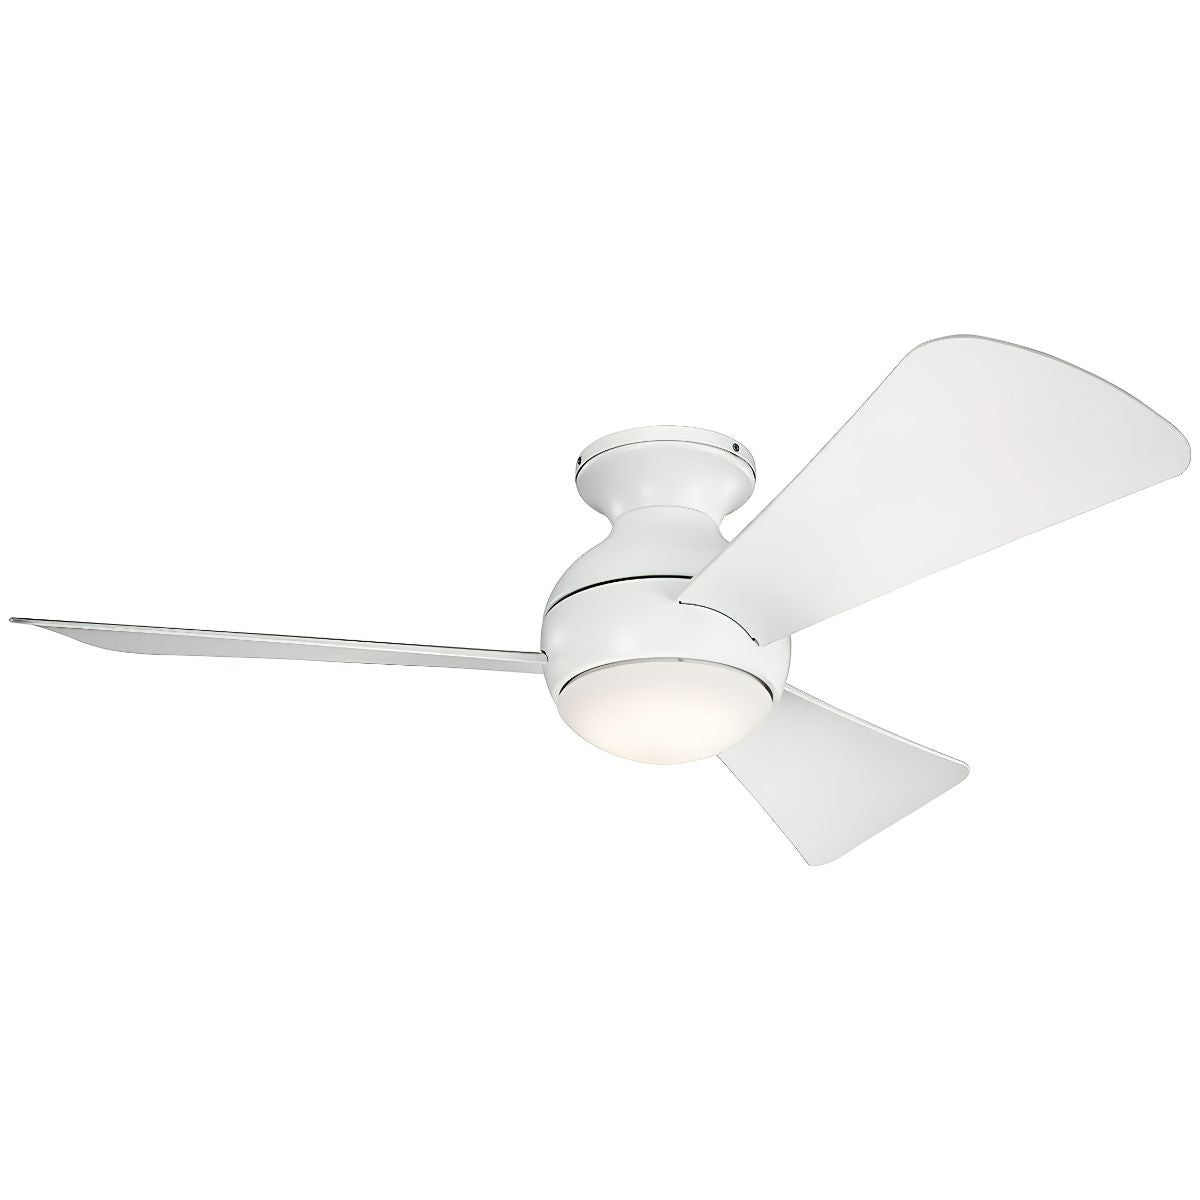 Sola 44 Inch Propeller Outdoor Ceiling Fan With Light, Wall Control Included